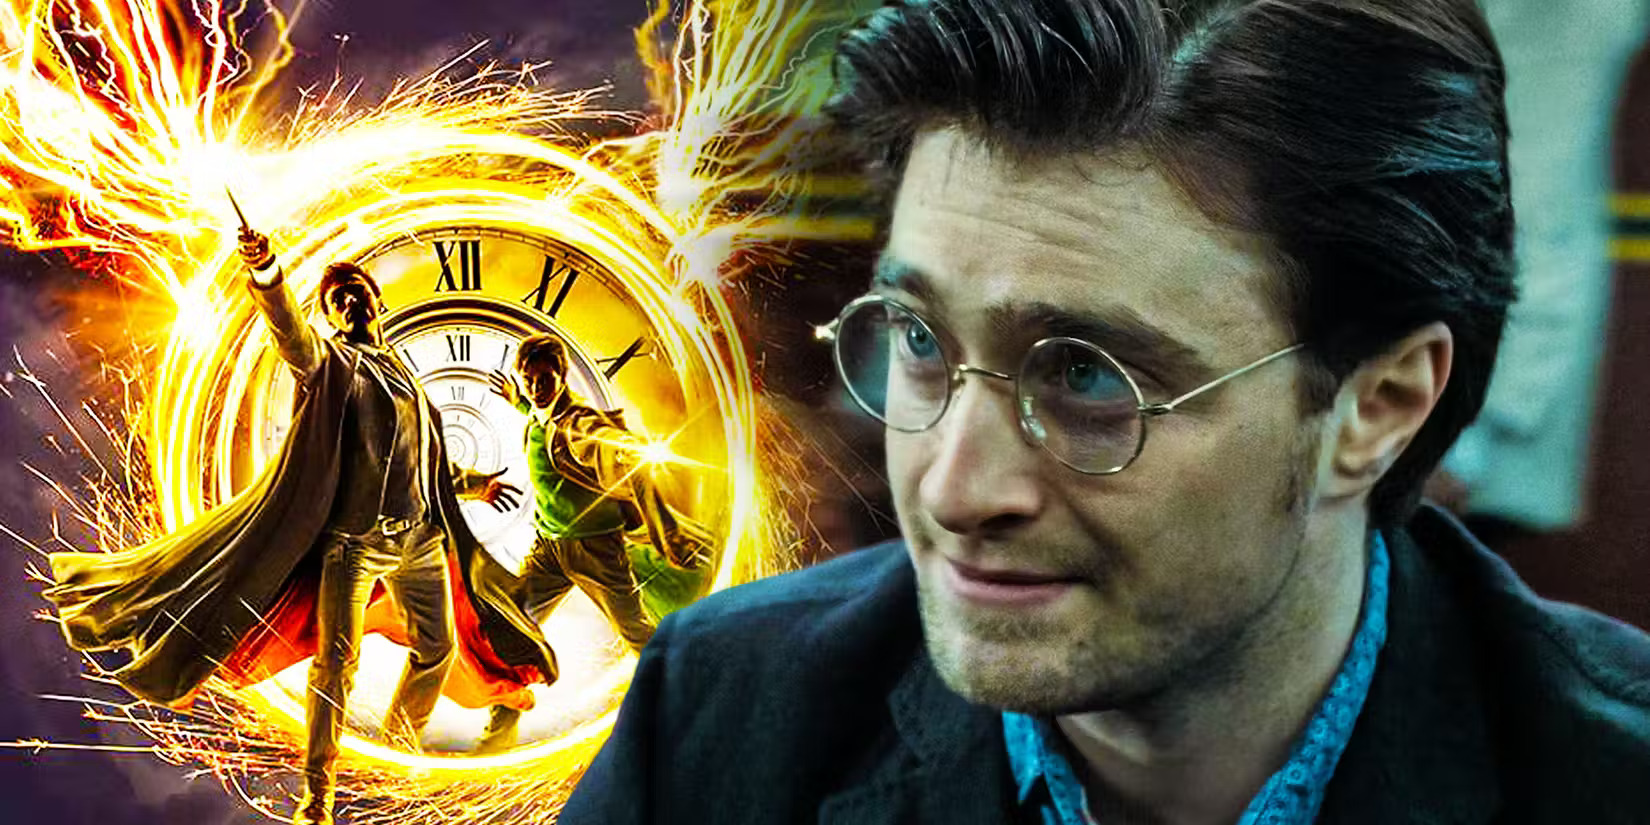 Why Hbo'S Harry Potter Tv Remake Needs A Different Ending From The Books And Movies